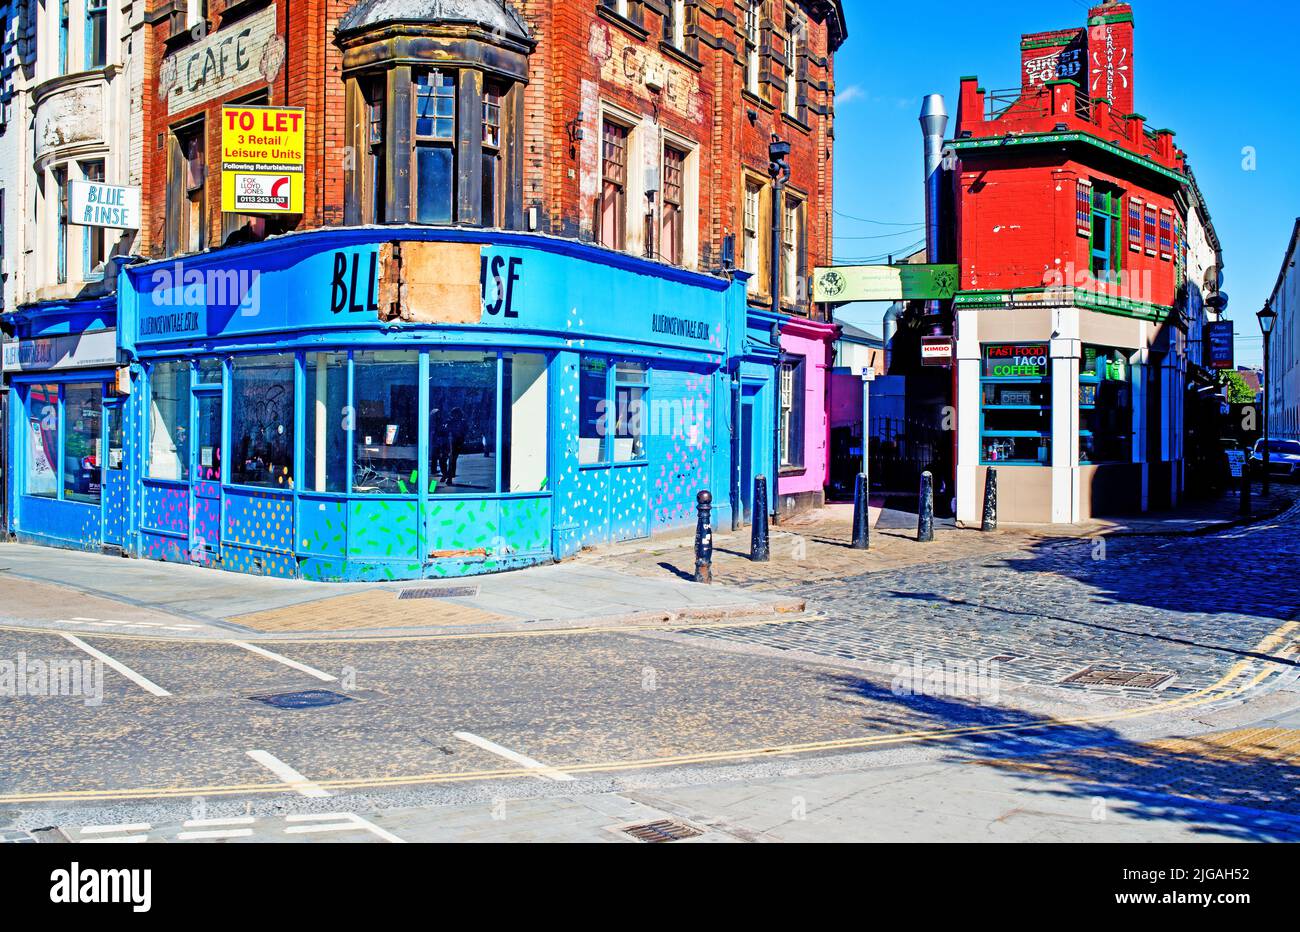 Vintage Clothing Shop and Coffee House, Call Lane, Leeds, Angleterre Banque D'Images